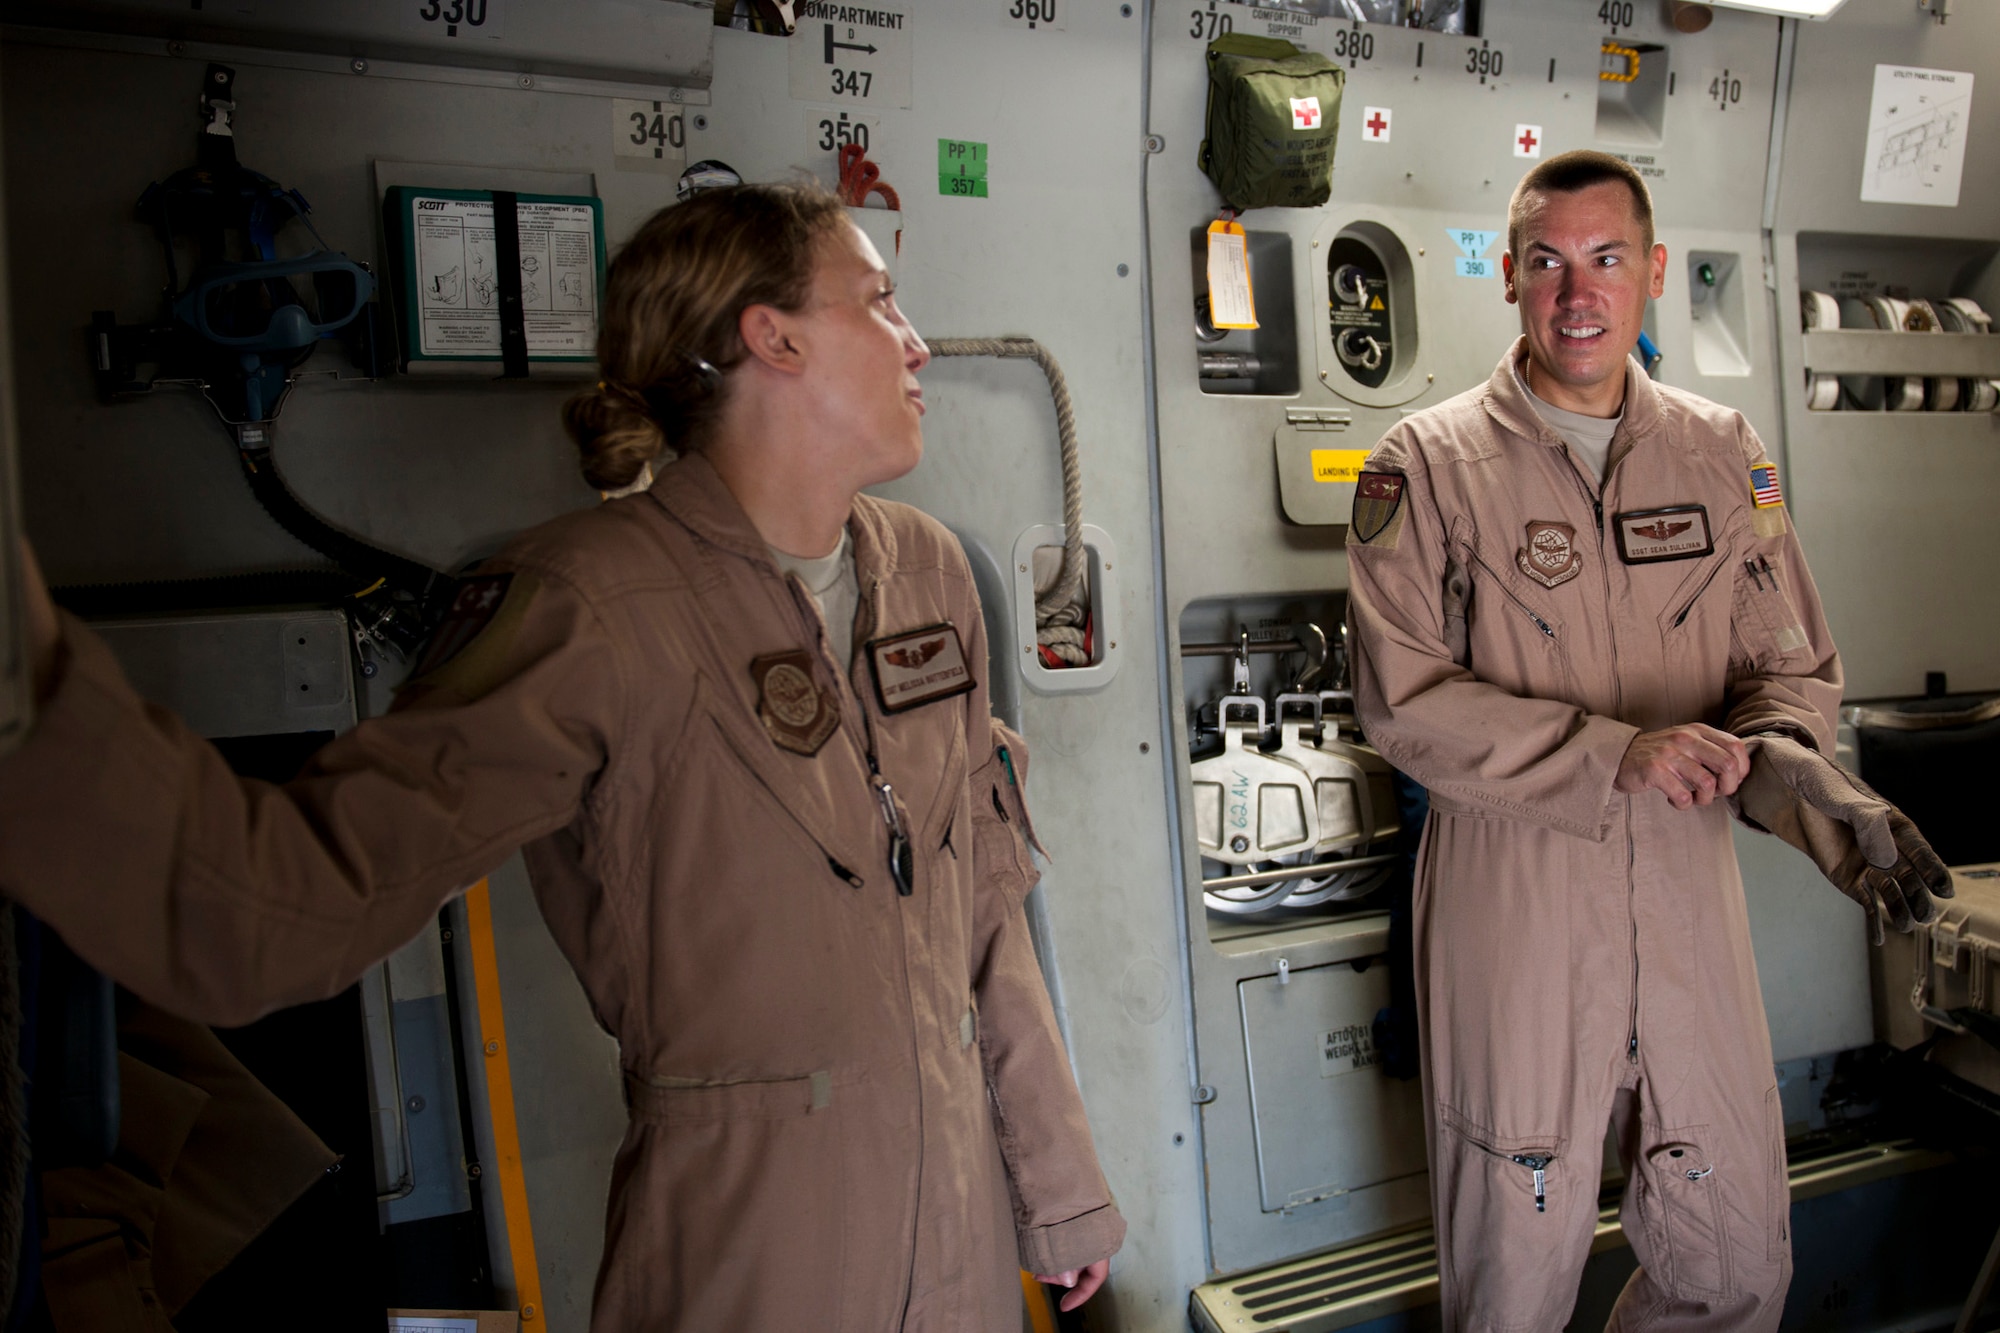 Staff Sgts. Melissa Butterfield, left, and Sean Sullivan, 817th Expeditionary Airlift Squadron loadmasters, share a laugh onboard a C-17 Globemaster III aircraft Aug. 18, 2011, at Incirlik Air Base, Turkey, prior to a mission to transport equipment and supplies to Kandahar Air Field, Afghanistan. Loadmasters are responsible for ensuring cargo is properly loaded and secured. (U.S. Air Force photo by Tech. Sgt. Michael B. Keller/Released)